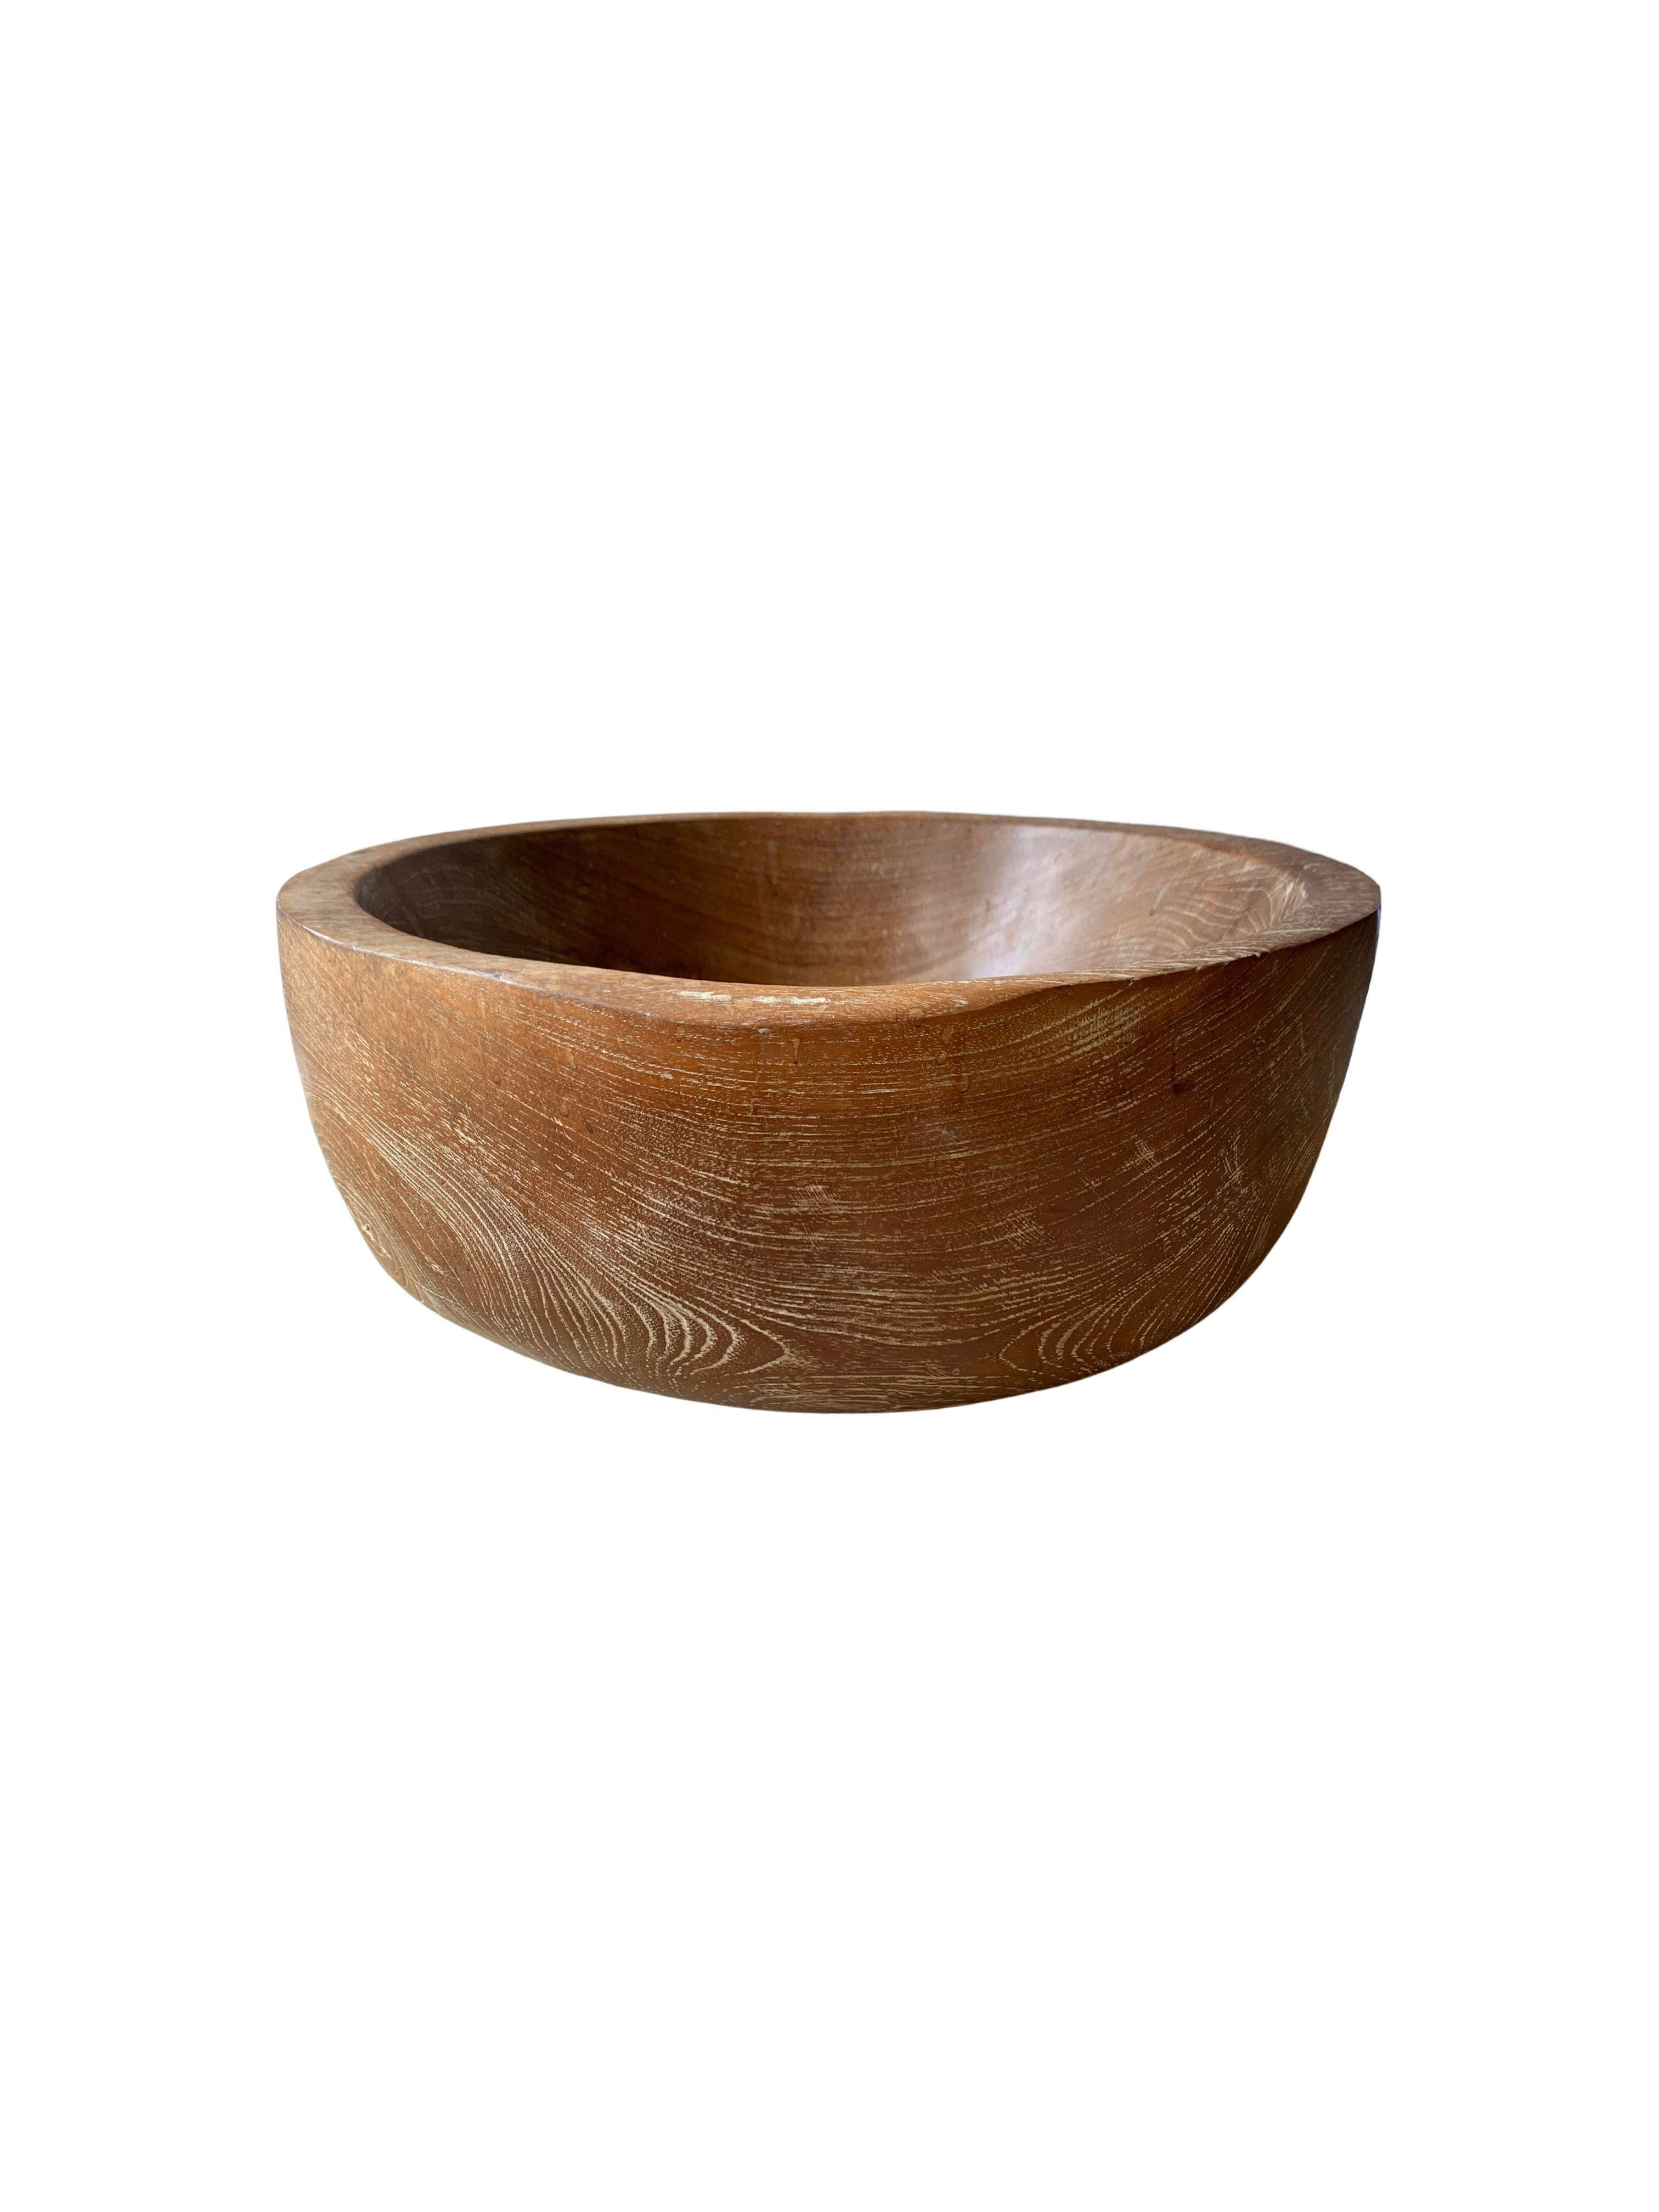 A solid teak wood bowl crafted on the island of Java from a slab of teak wood.cThe bowl was cut from a much larger slab of wood and maintains a minimalist organic design with a range of textures. Perfect to display items as a centrepiece or